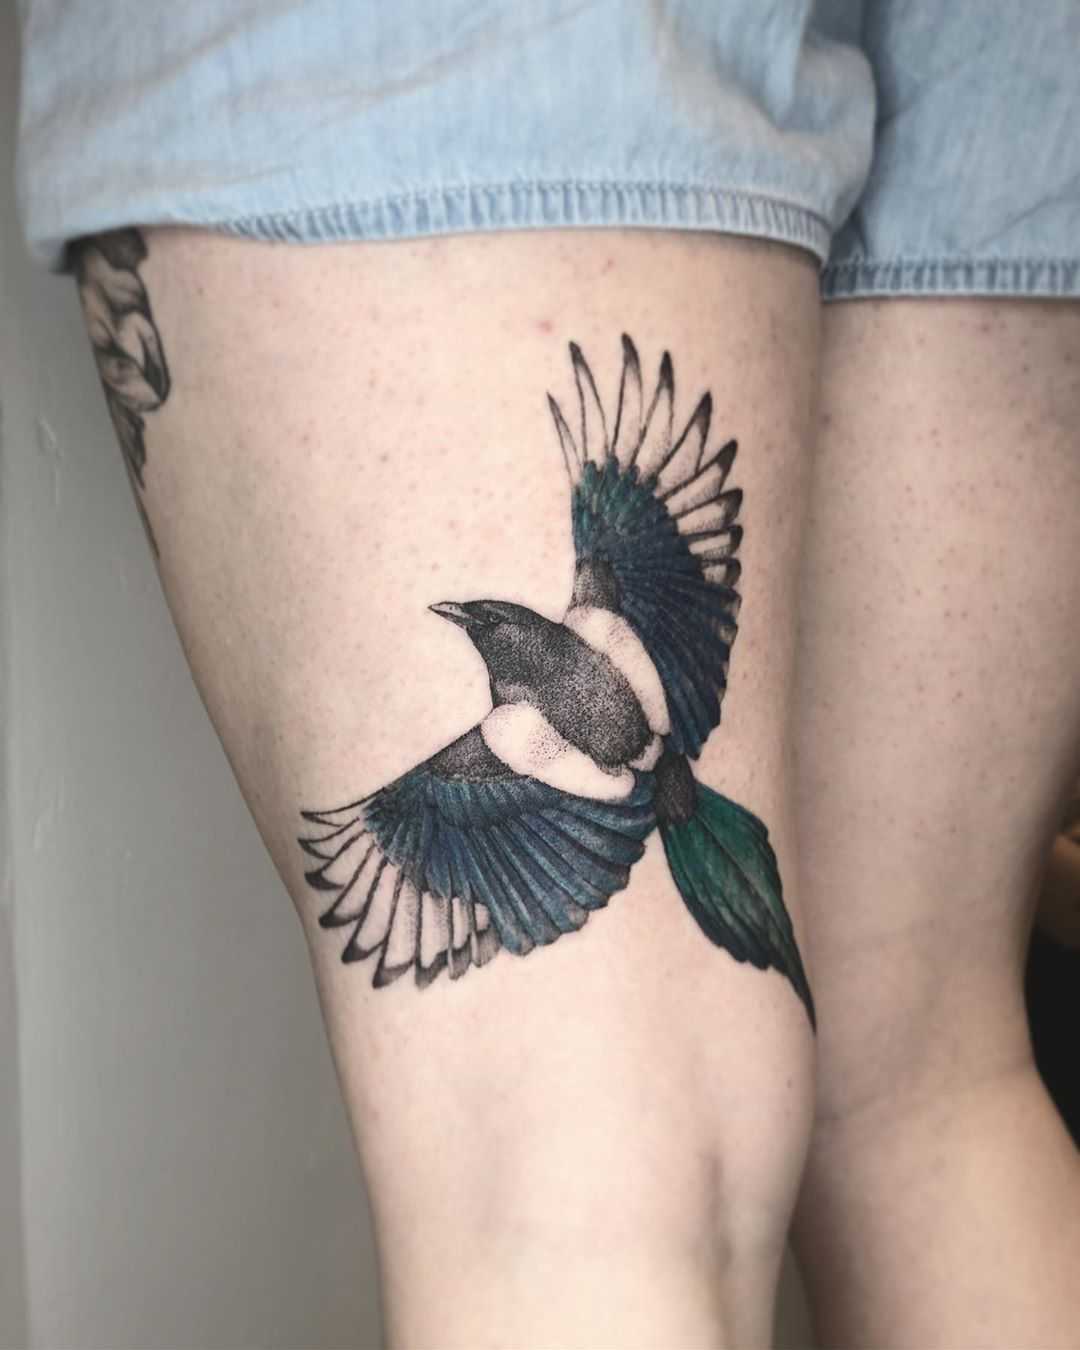 Magpie tattoo by Annelie Fransson